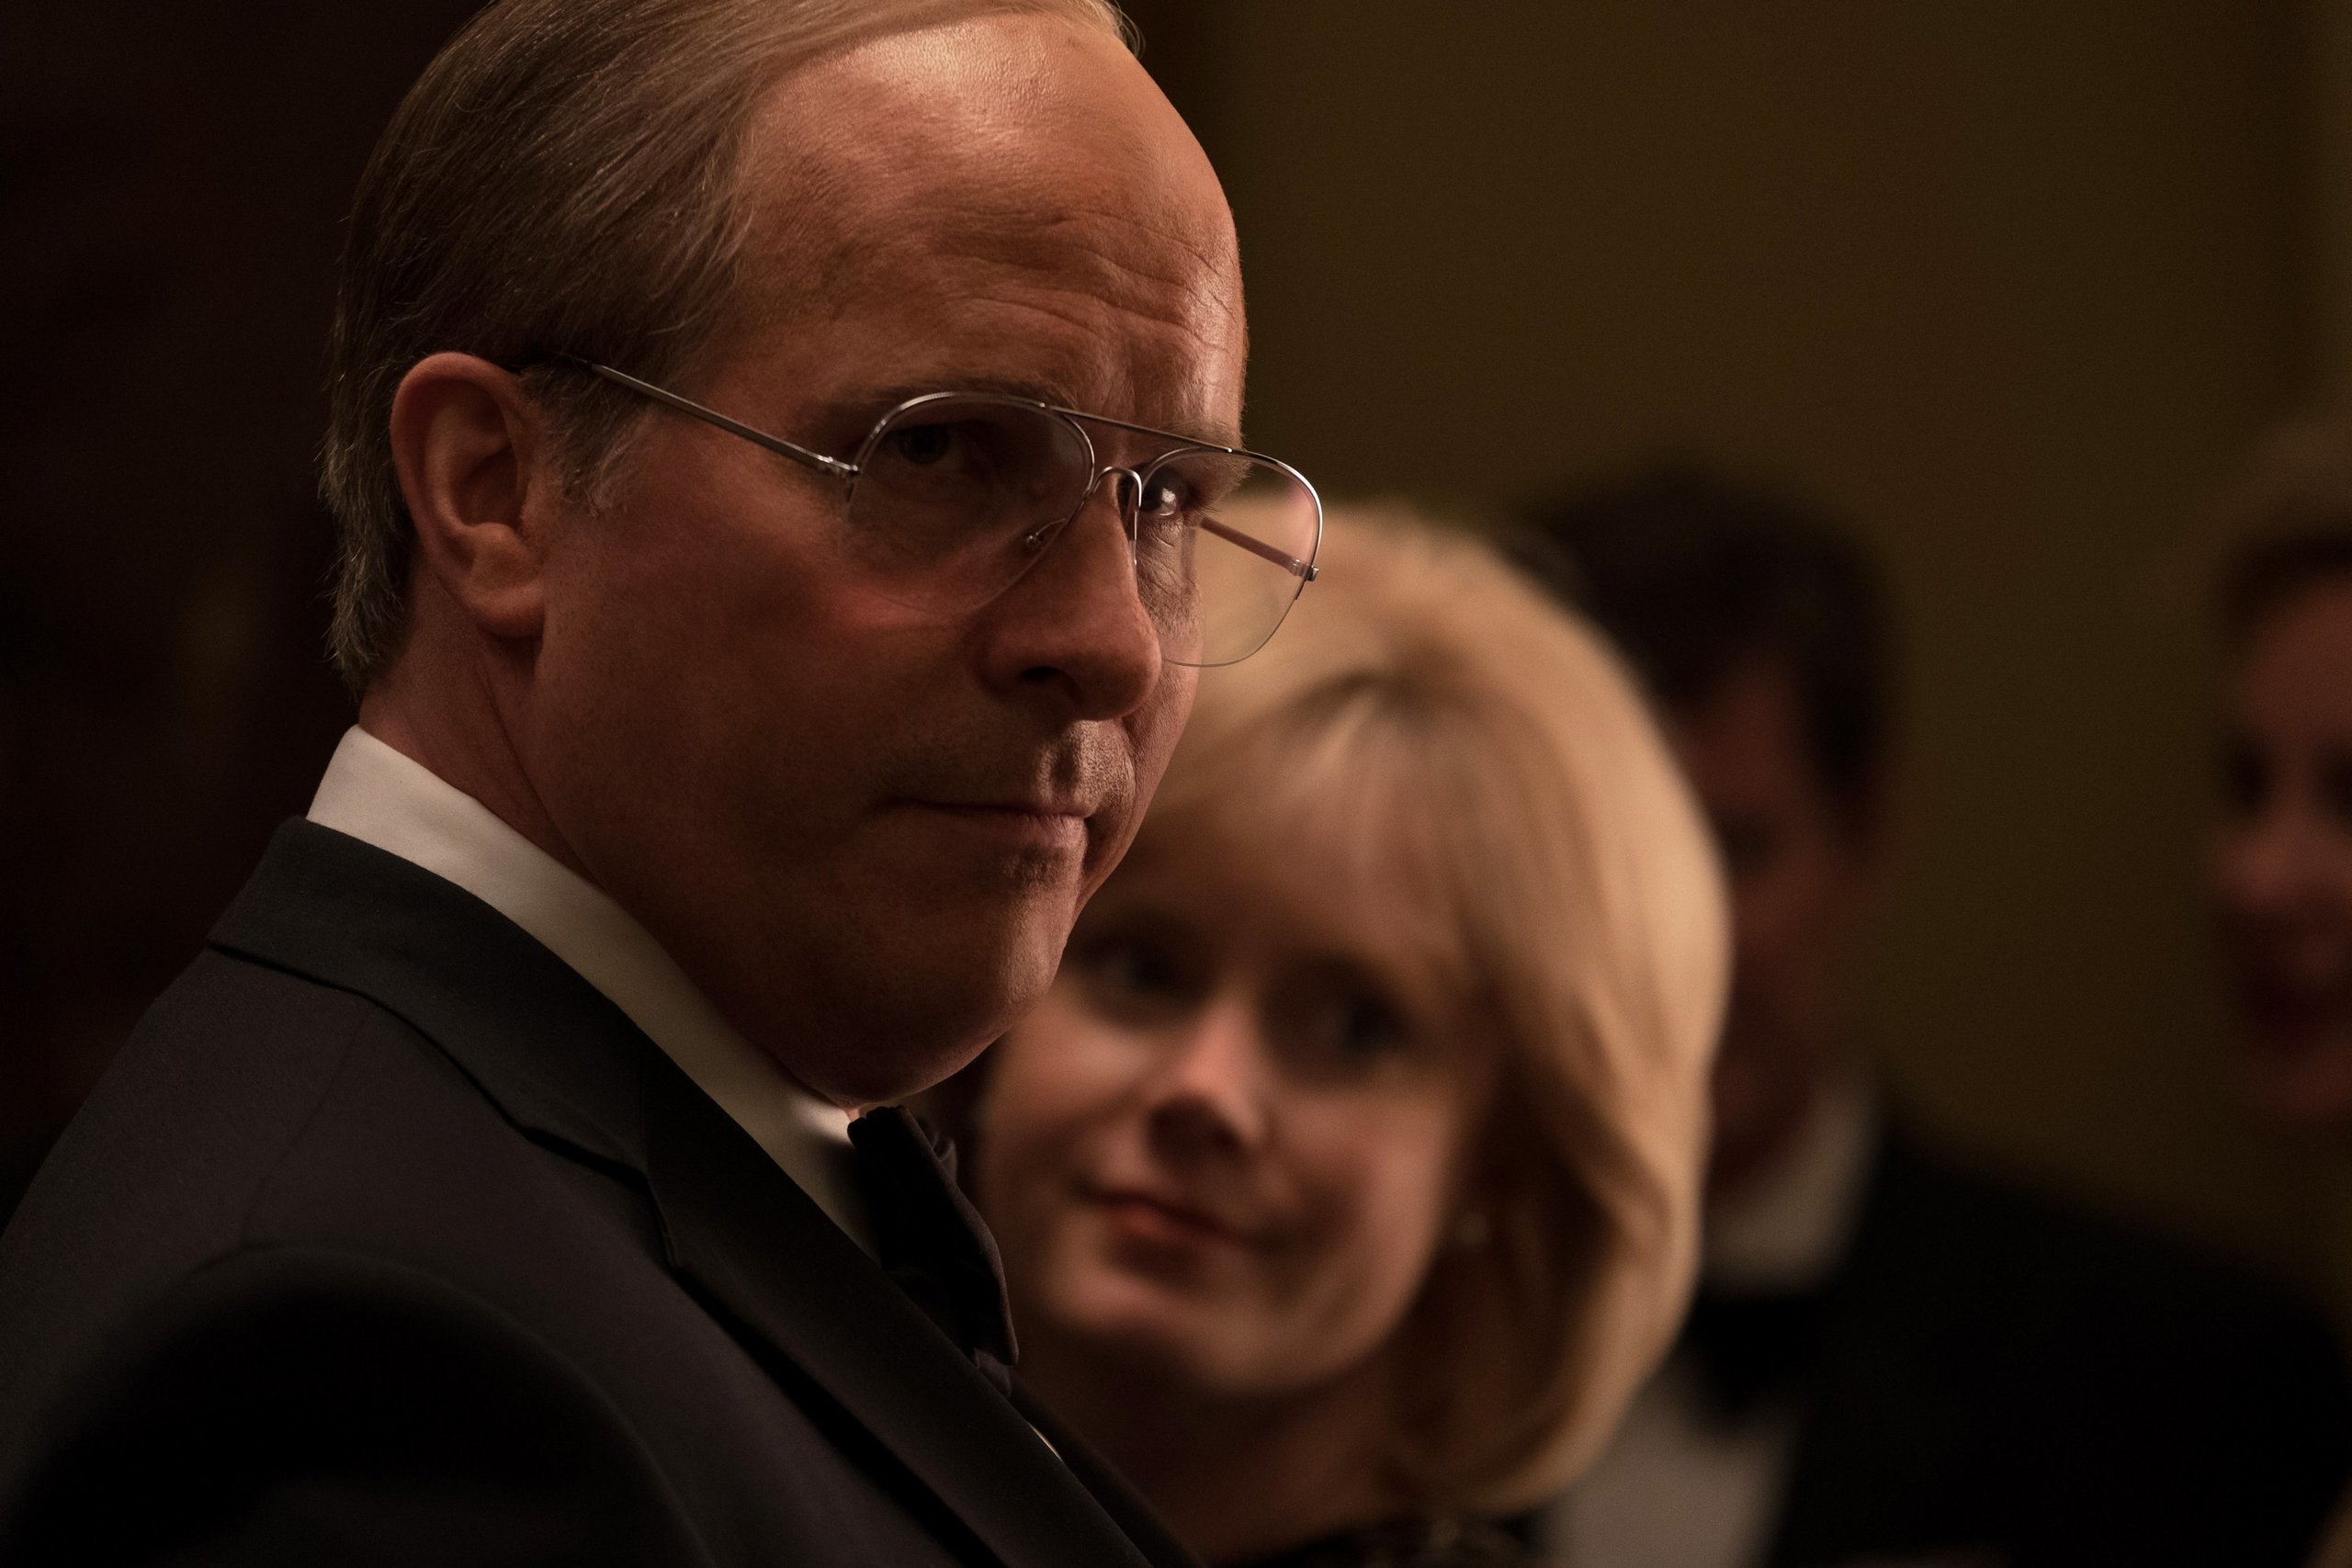 Dick cheney on the vice movie